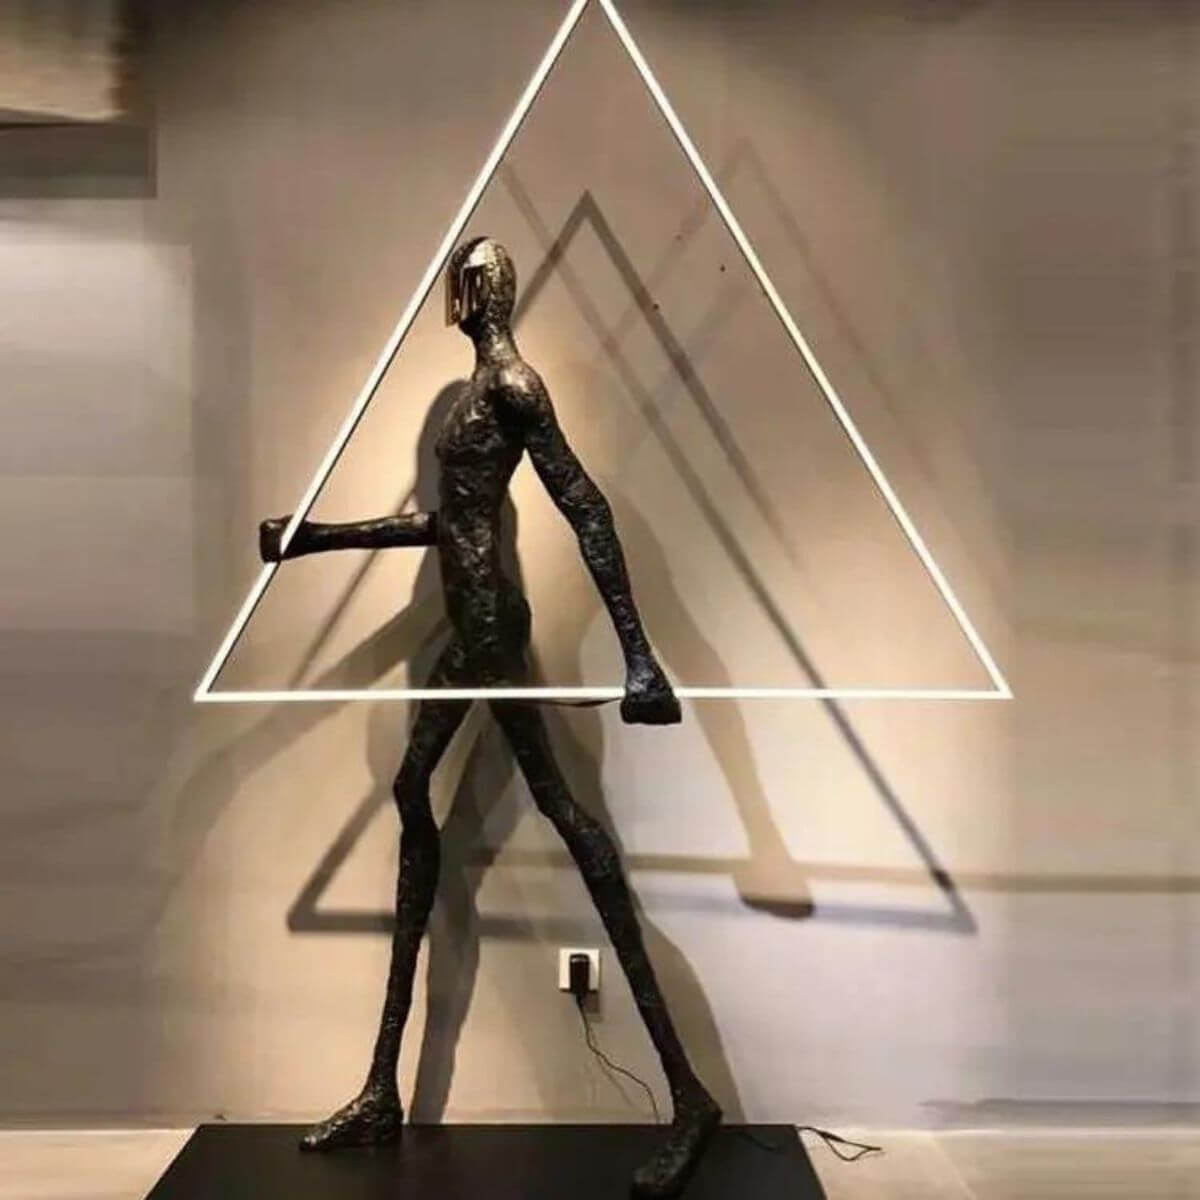 Human Statue Floor Lamp With Triangle 14